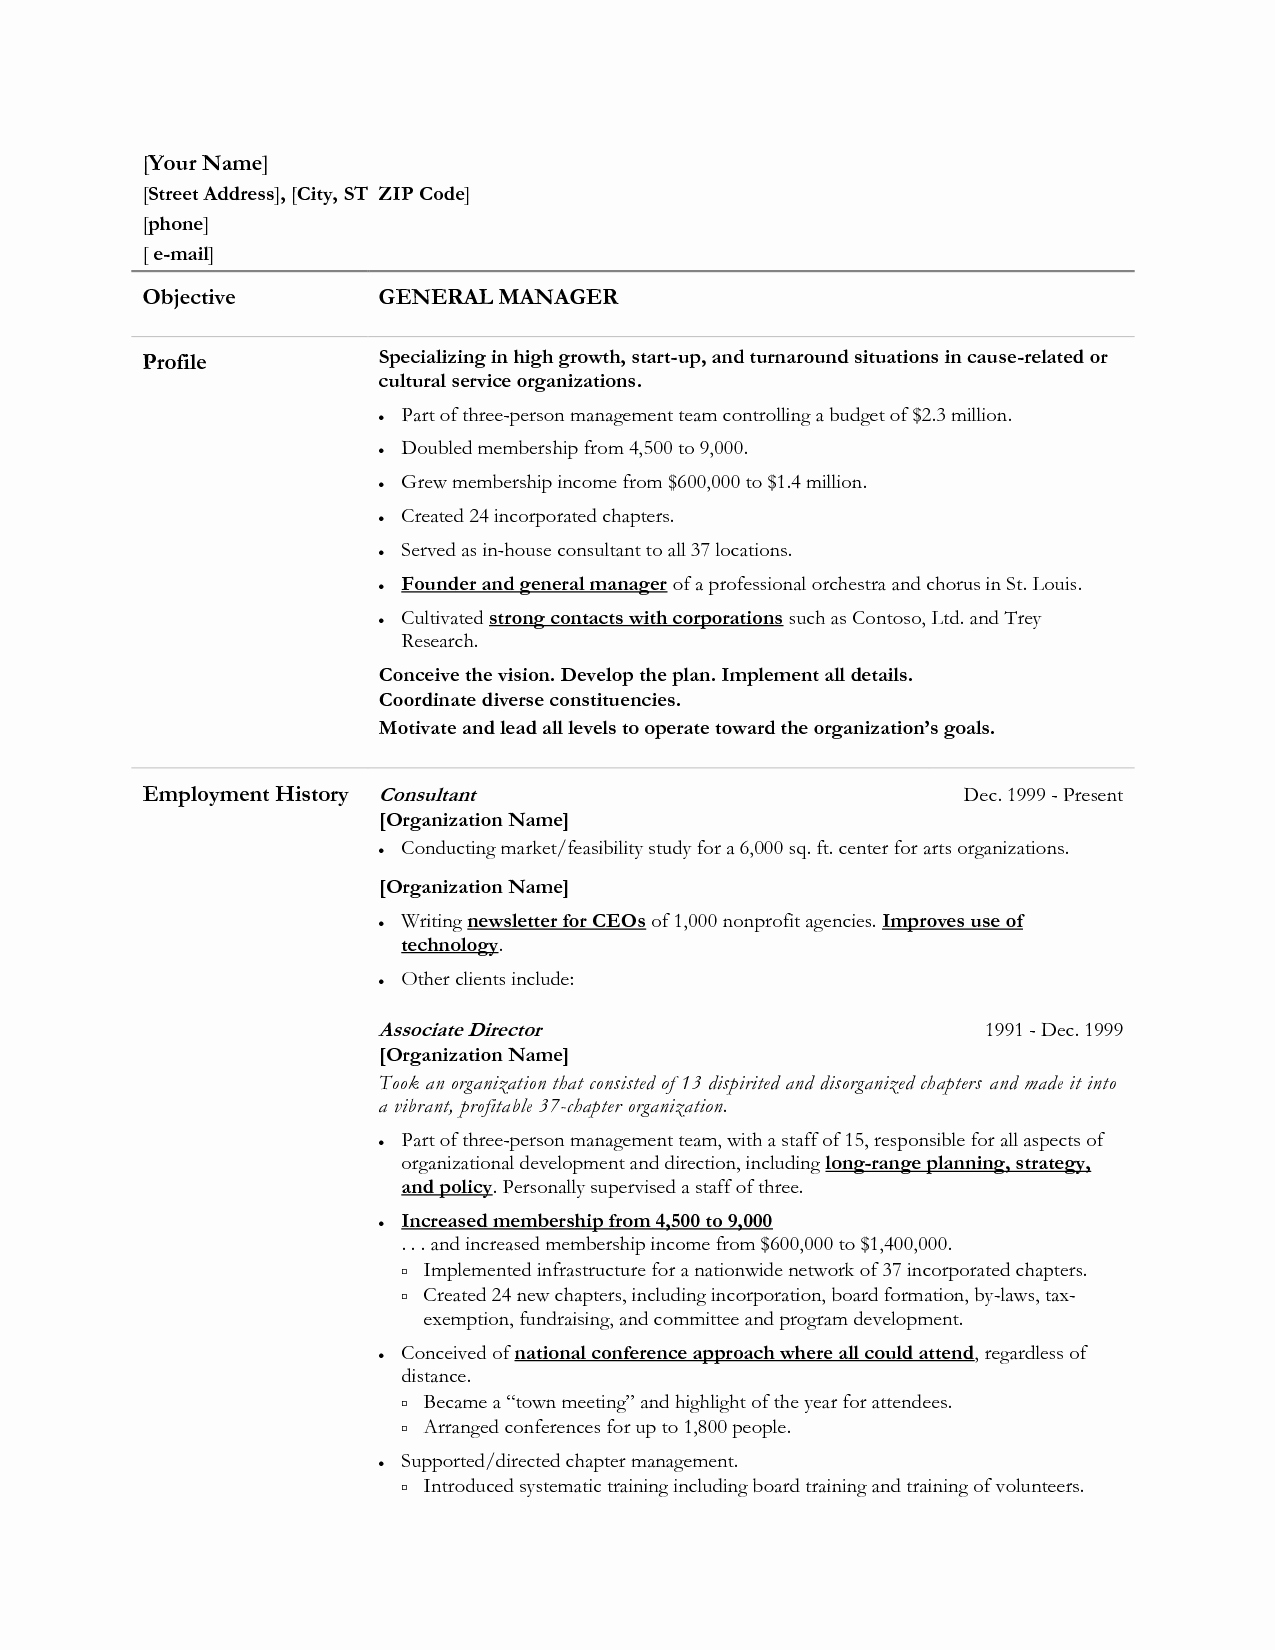 Generic Objective for Resume Unique General Objective for Resume Example